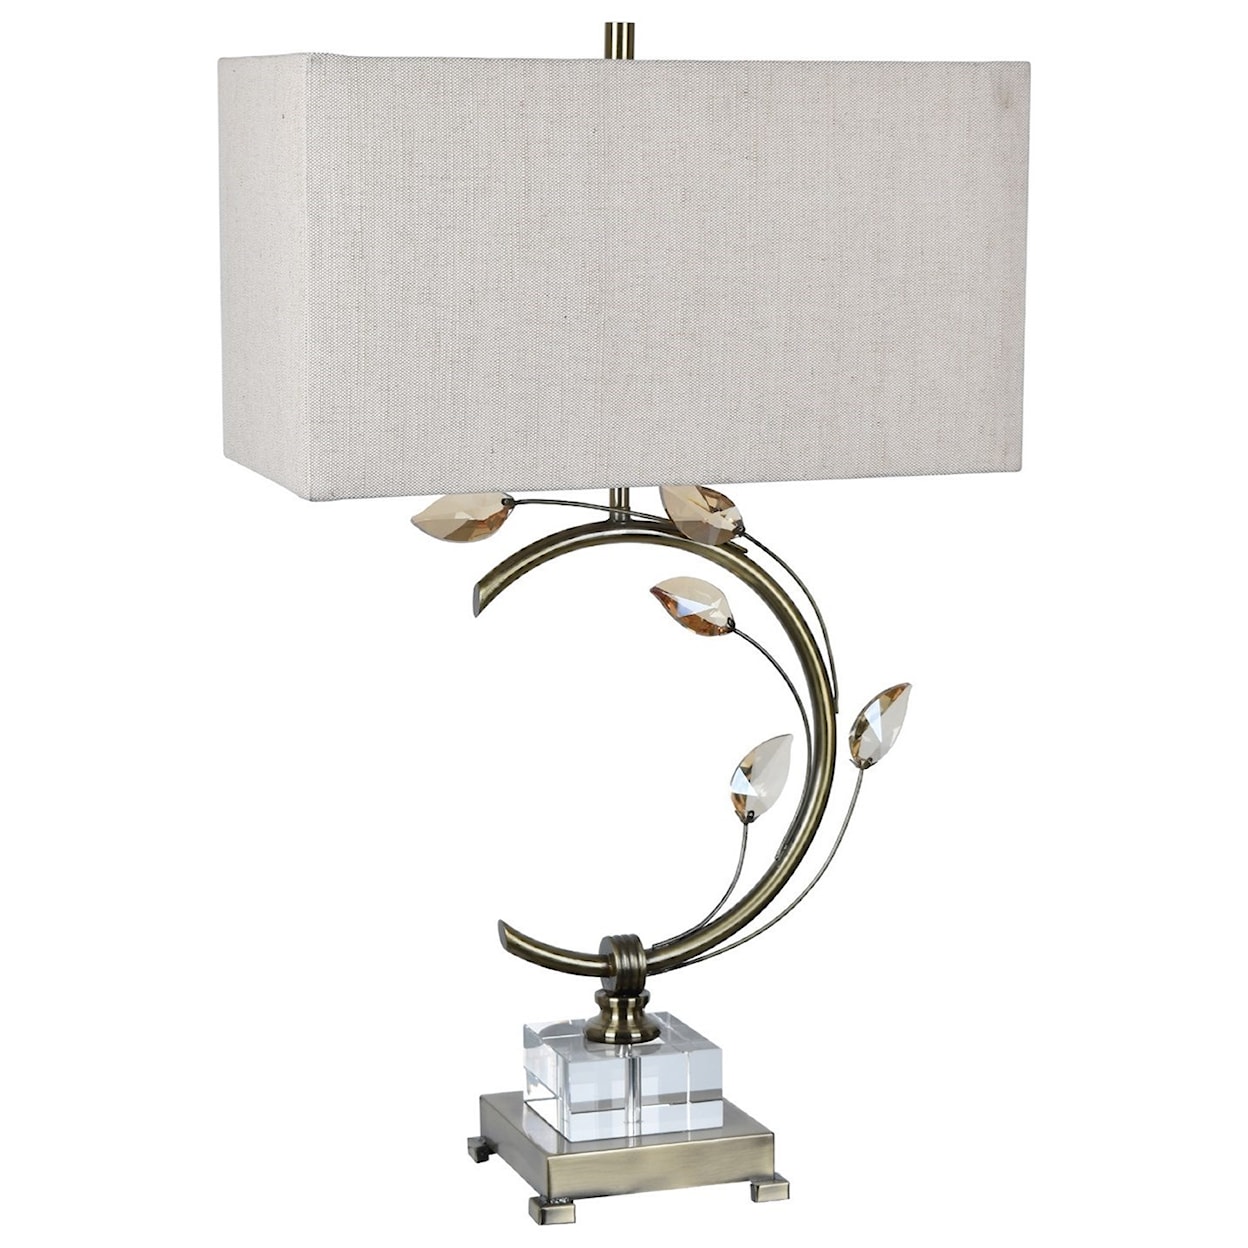 Crestview Collection Lighting Laura Table Lamp